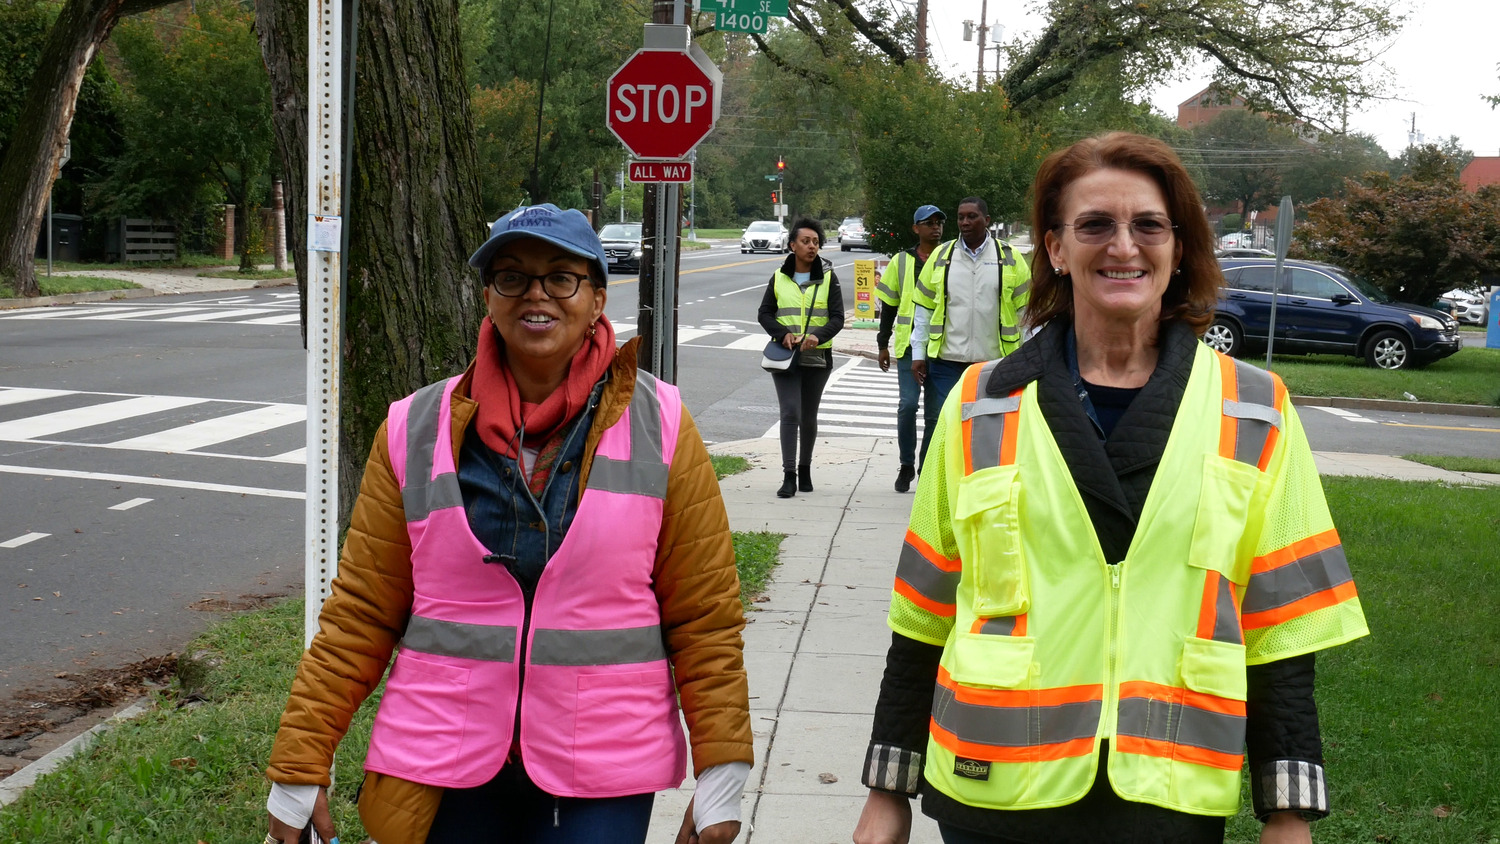 Two women wearing safety vests smile while walking on a sidewalk, with other pedestrians and a stop sign in the background.